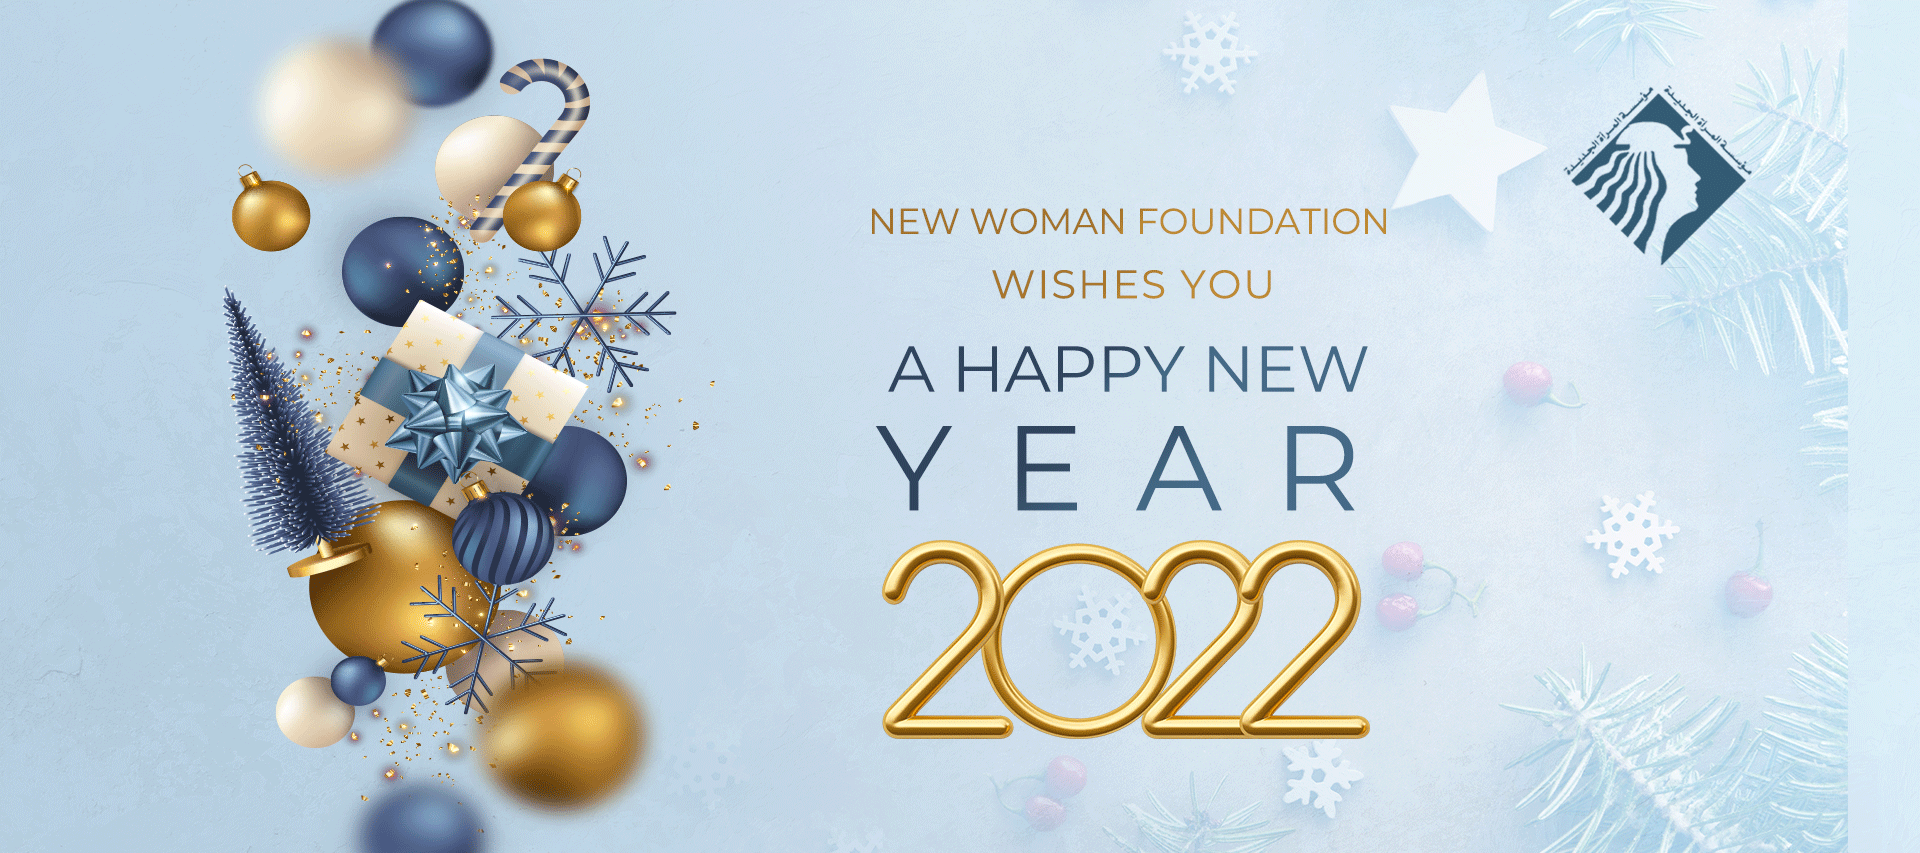 New Woman Foundation wishes Happy New Year